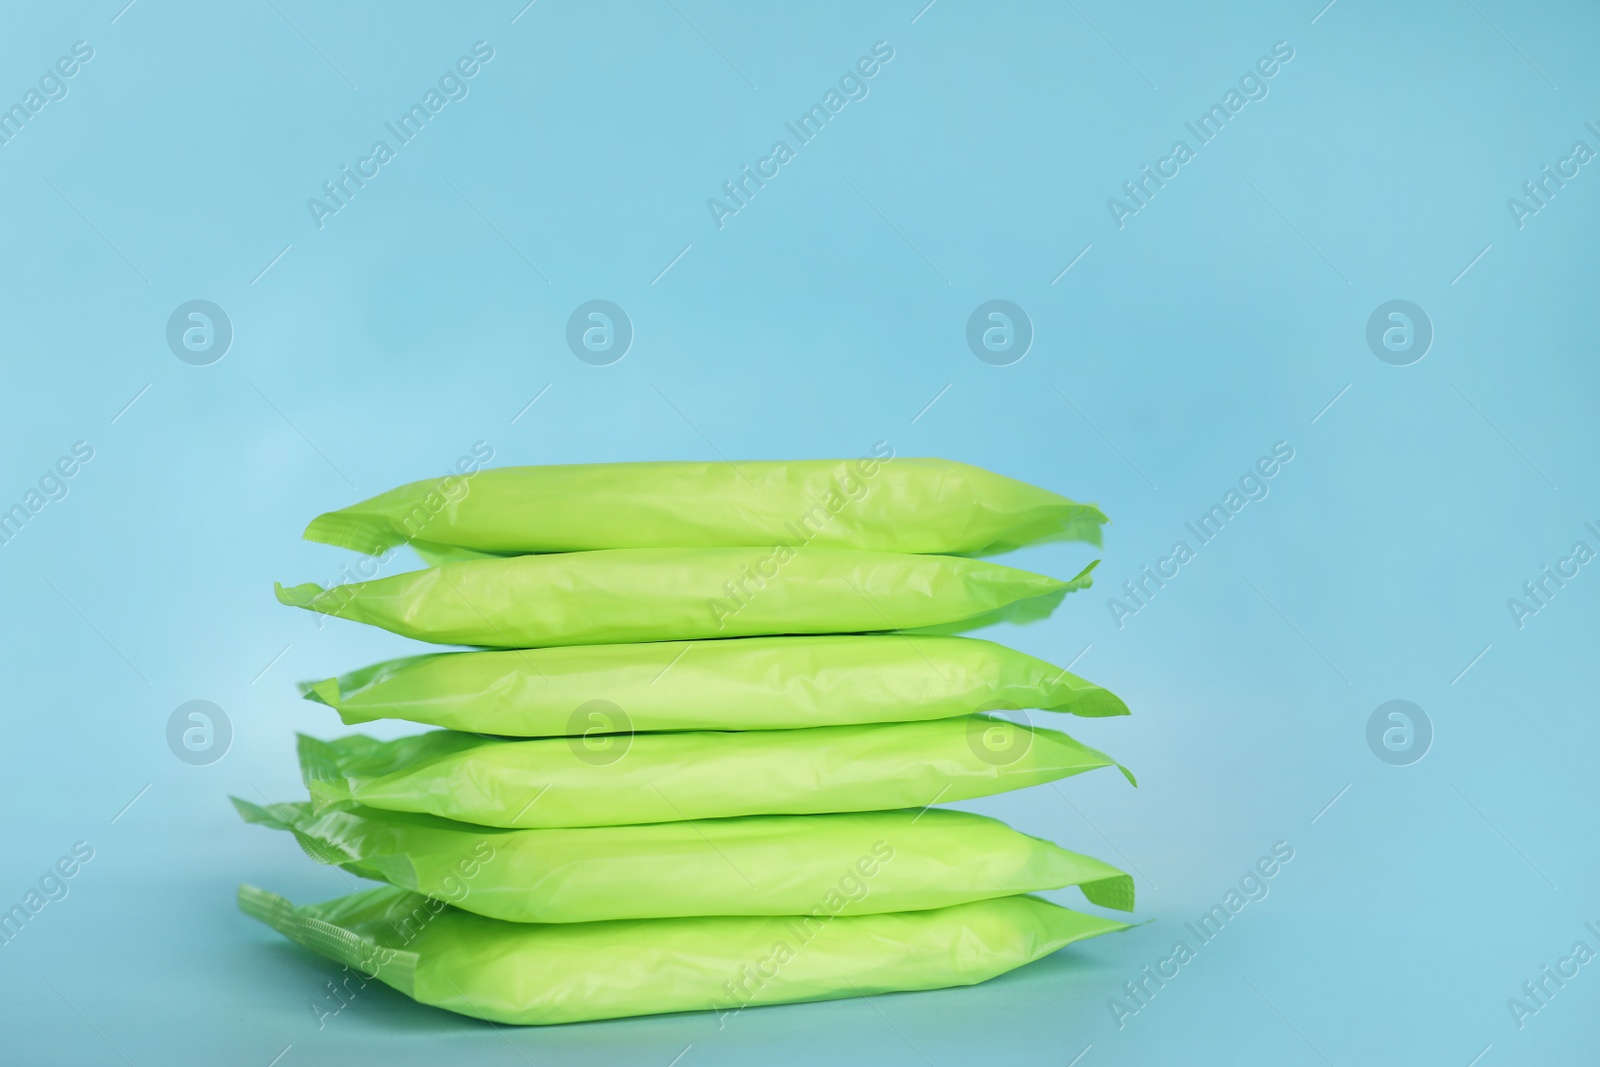 Photo of Stack of menstrual pads on light blue background